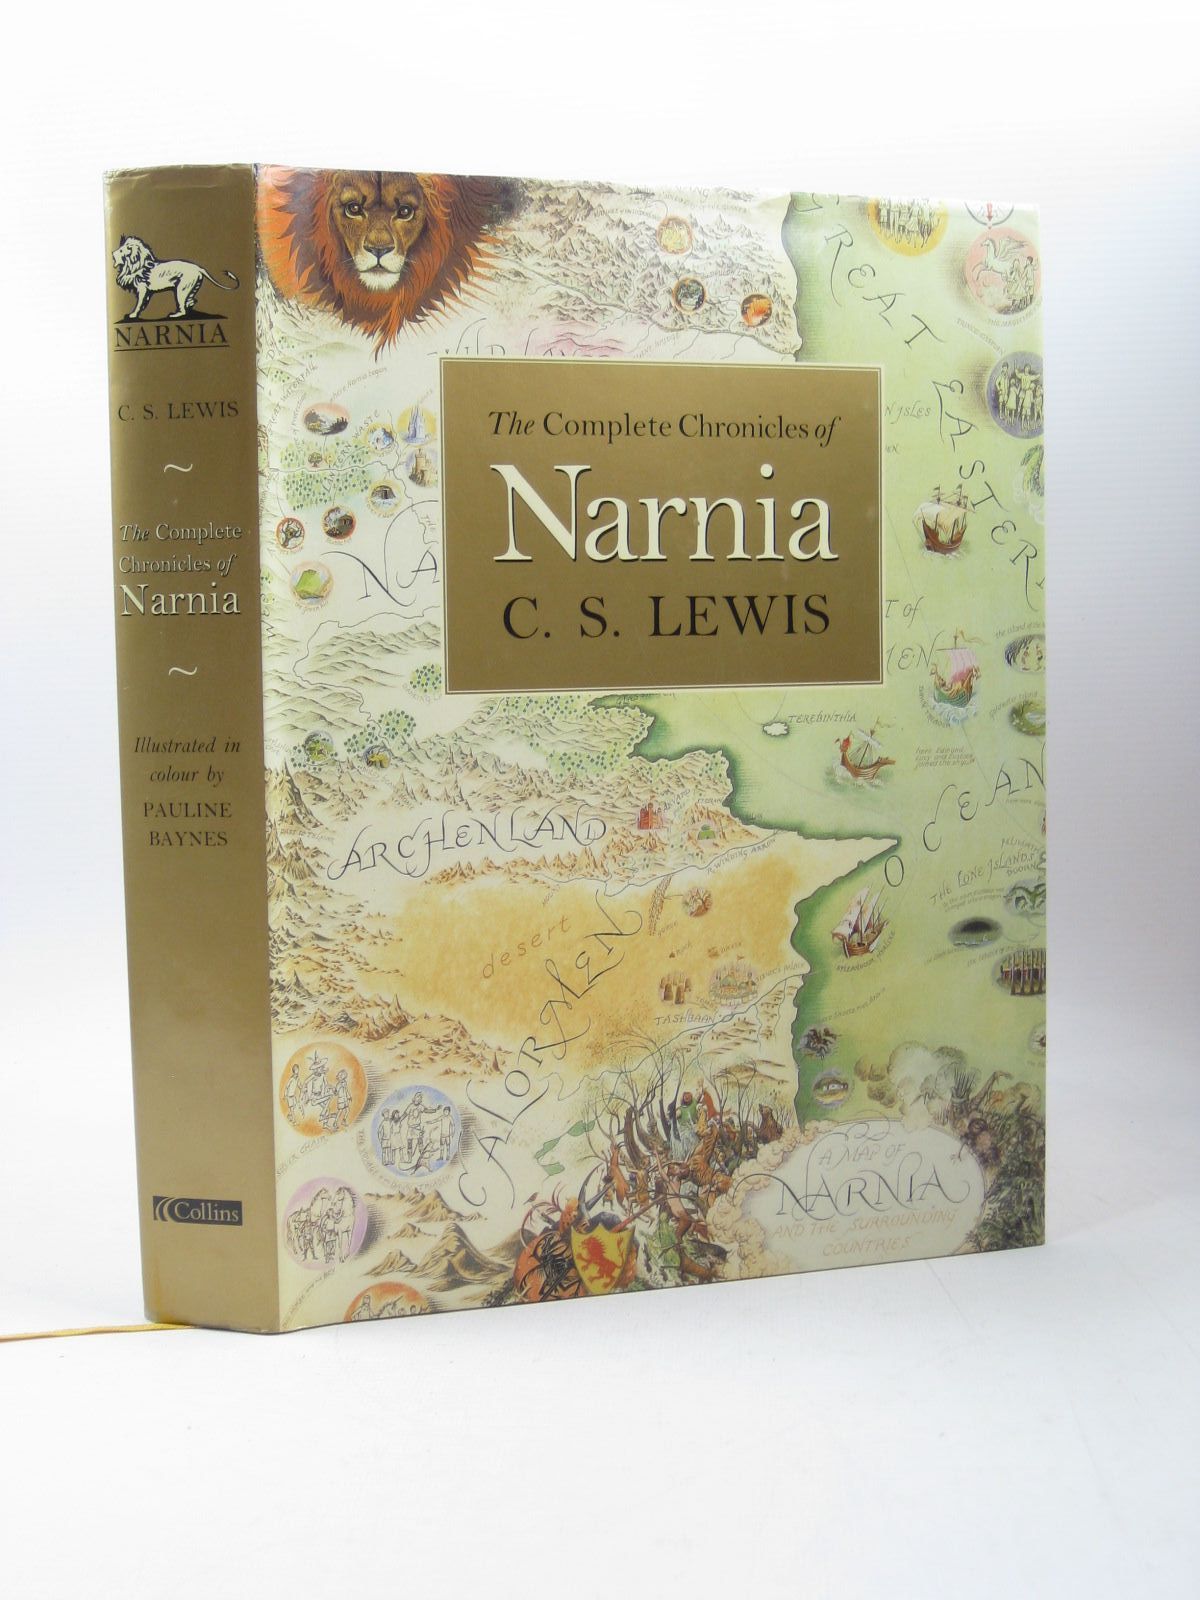 Stella Rose #39 s Books : THE COMPLETE CHRONICLES OF NARNIA Written By C